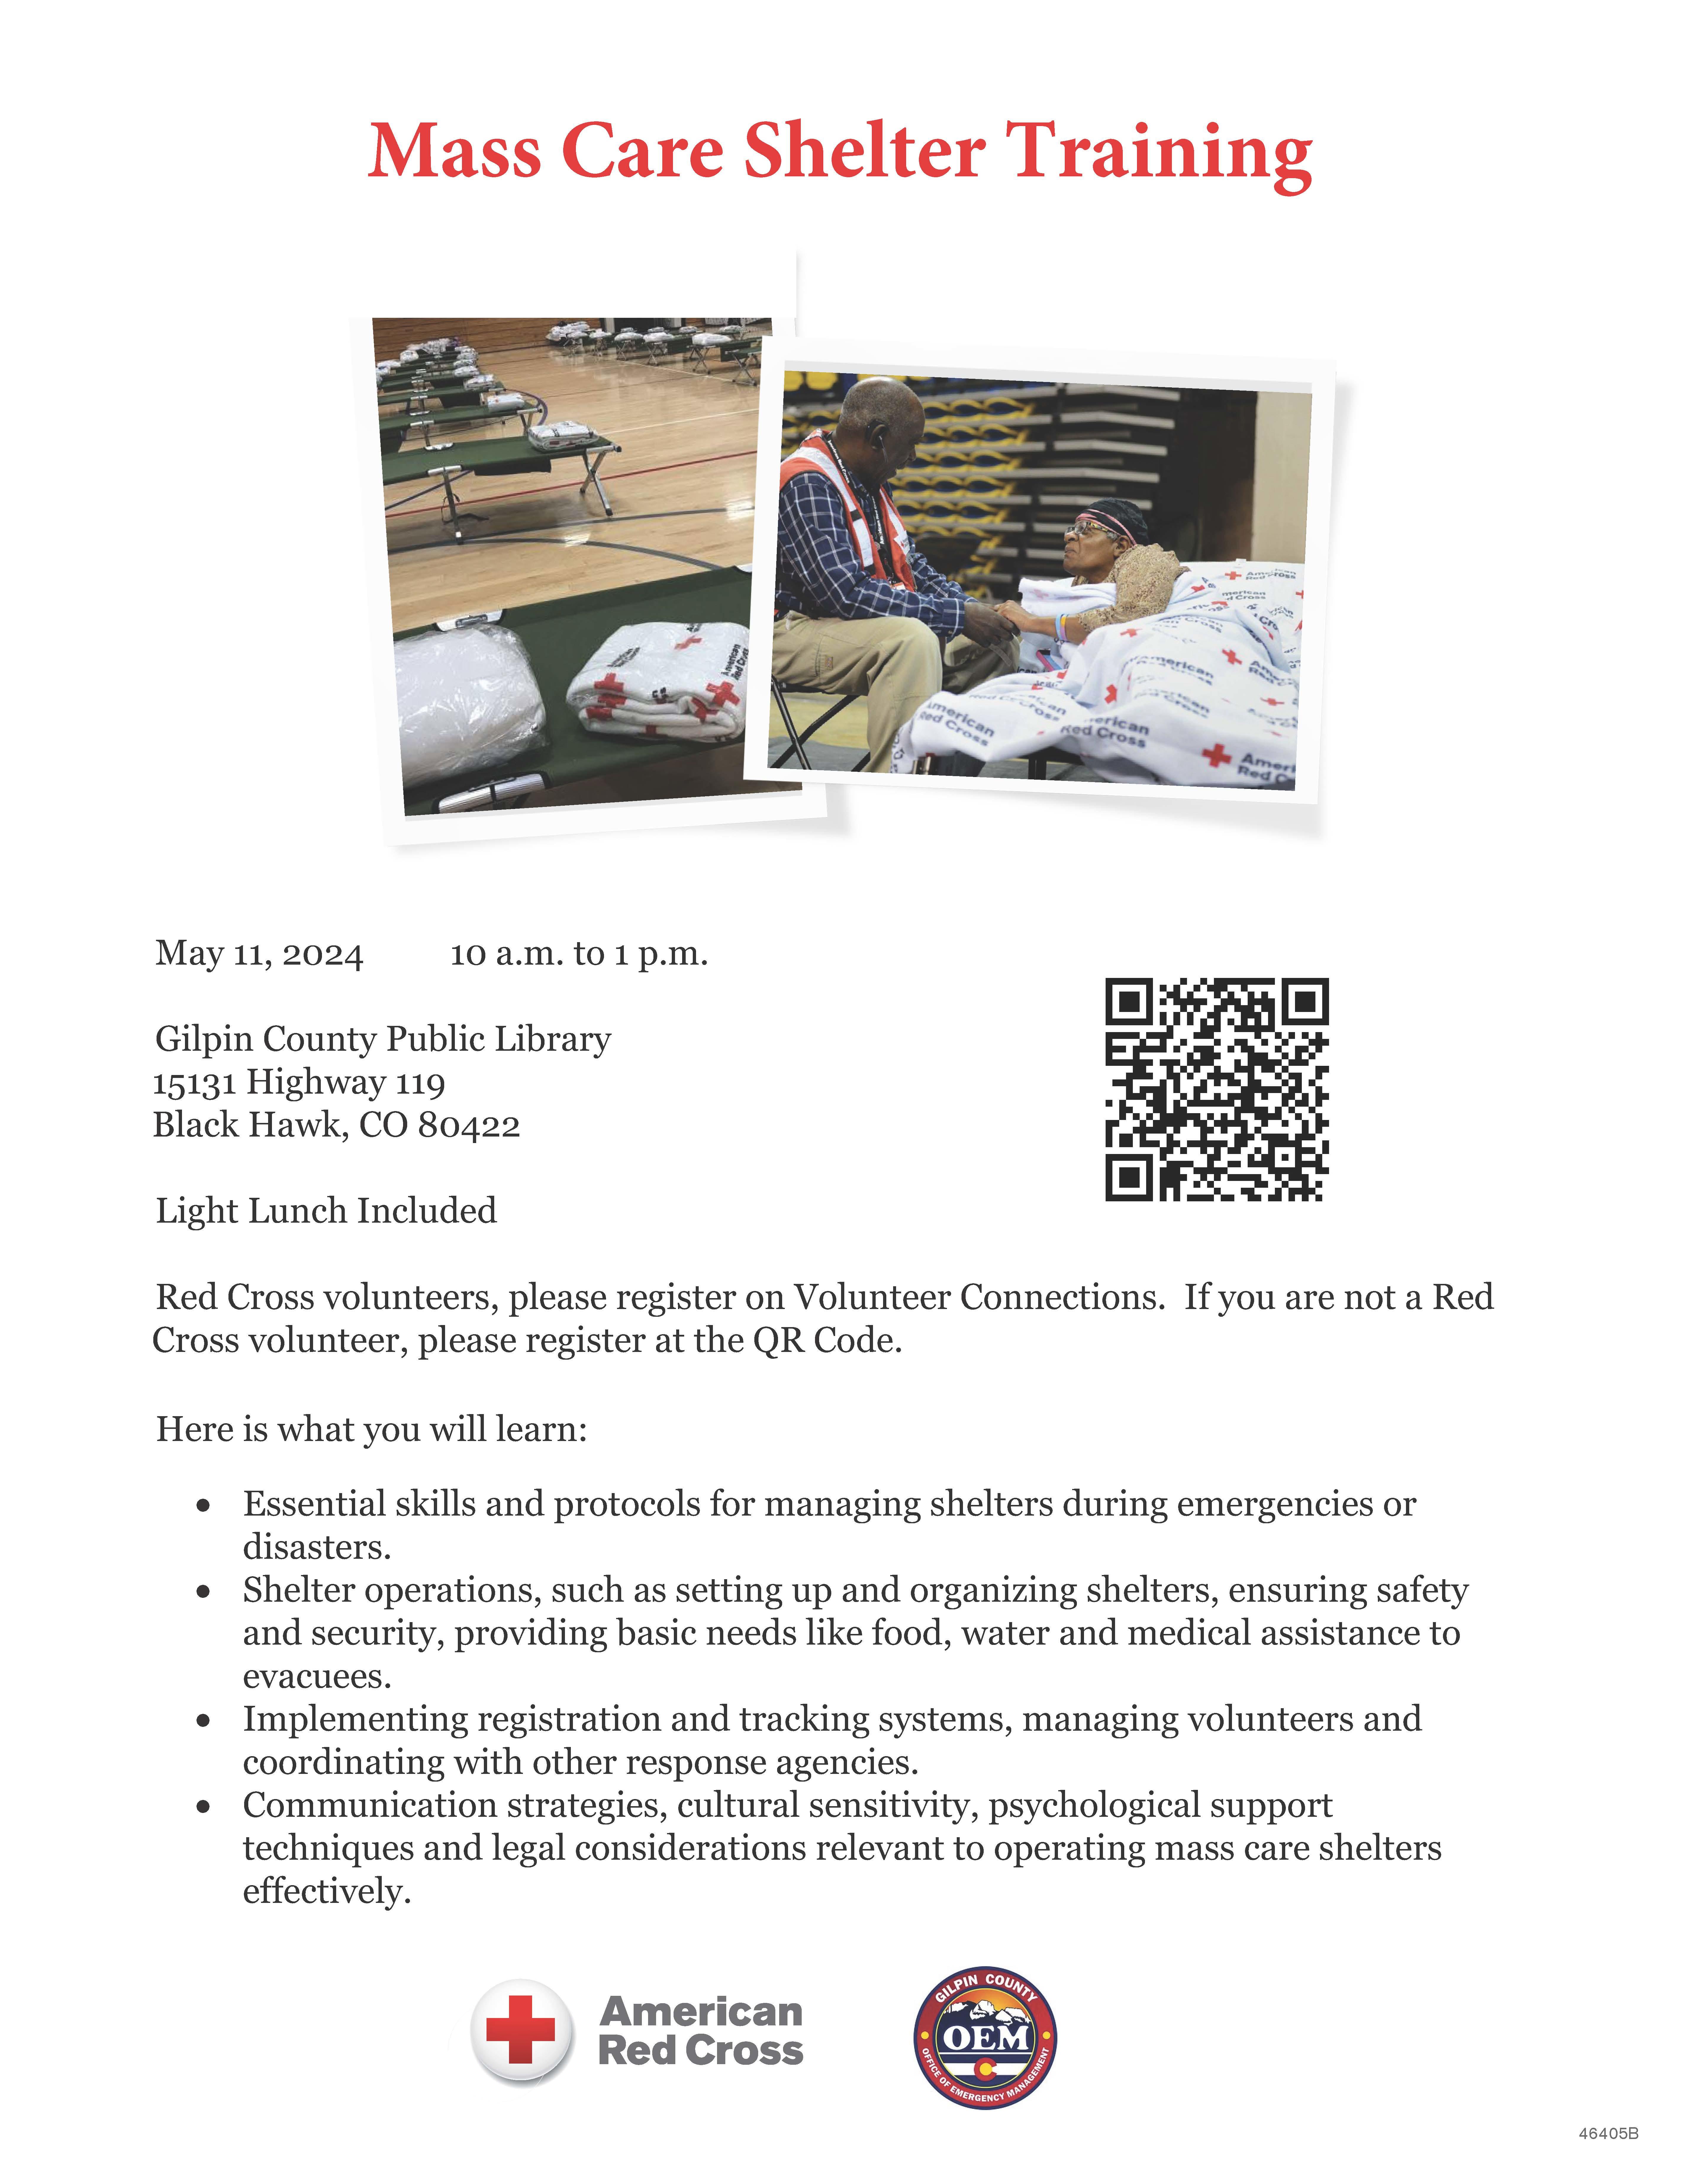 Mass Care Shelter Training Flyer for May 11, 2024